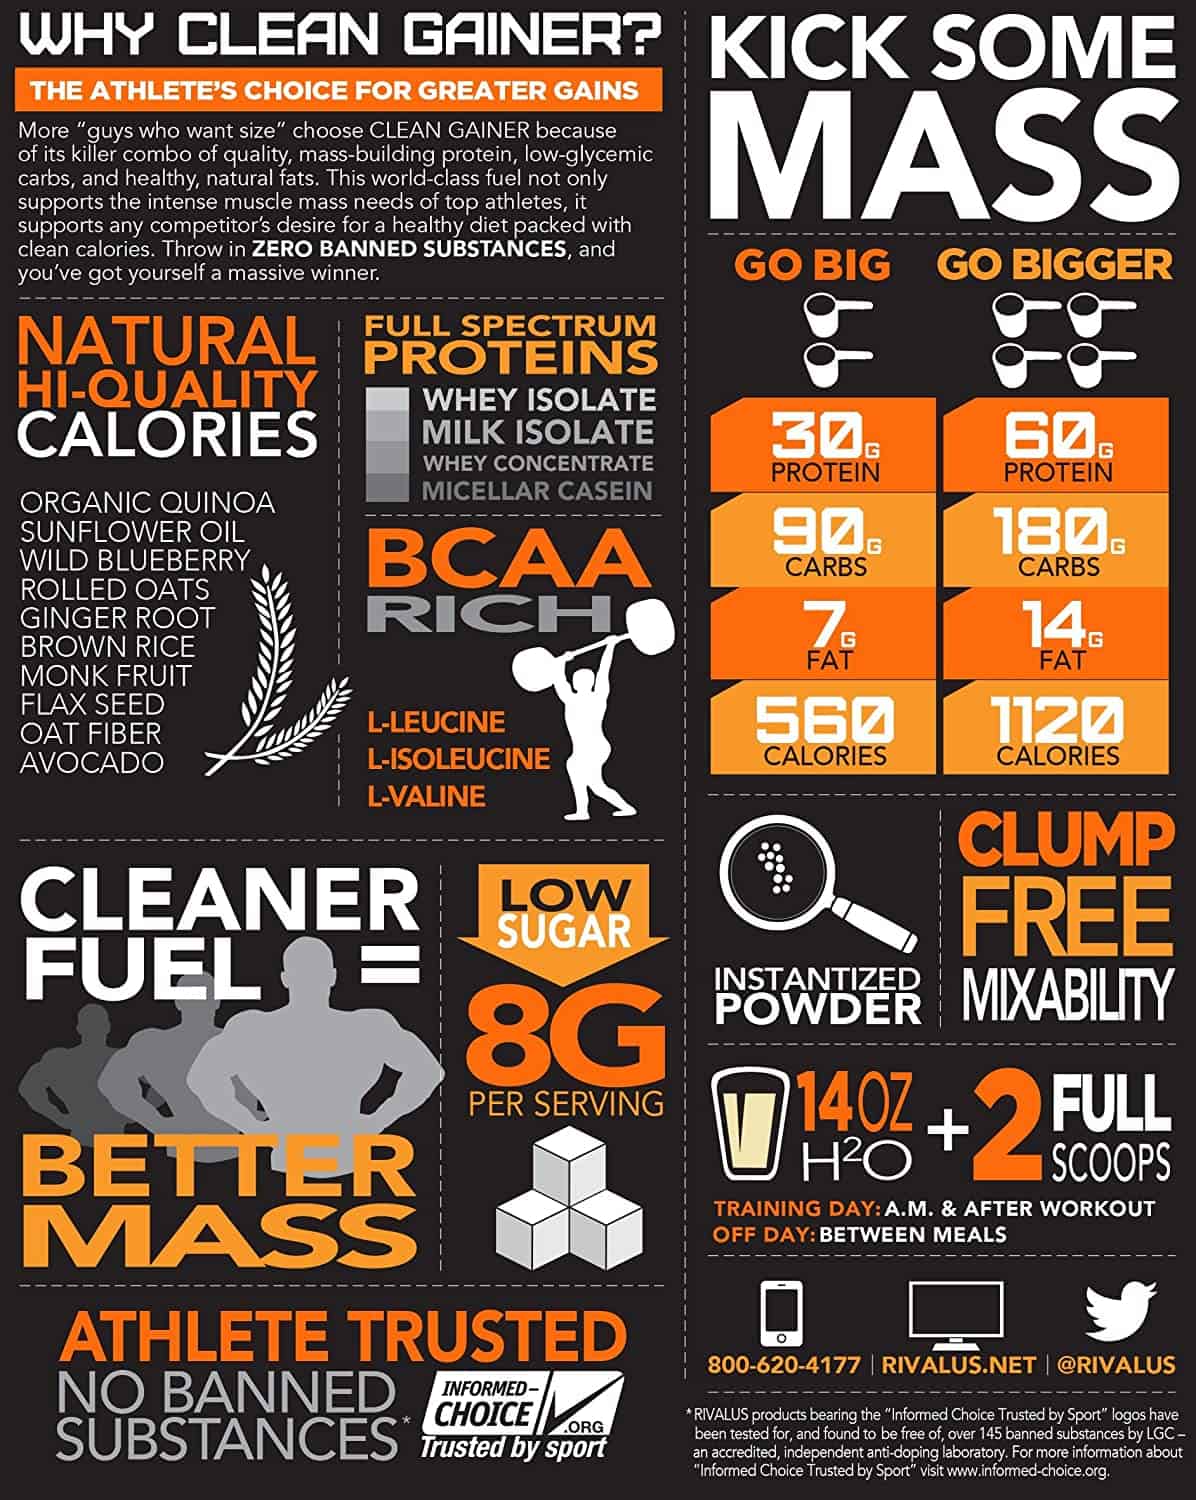 Clean Gainer By Rival Us Nutritional Info